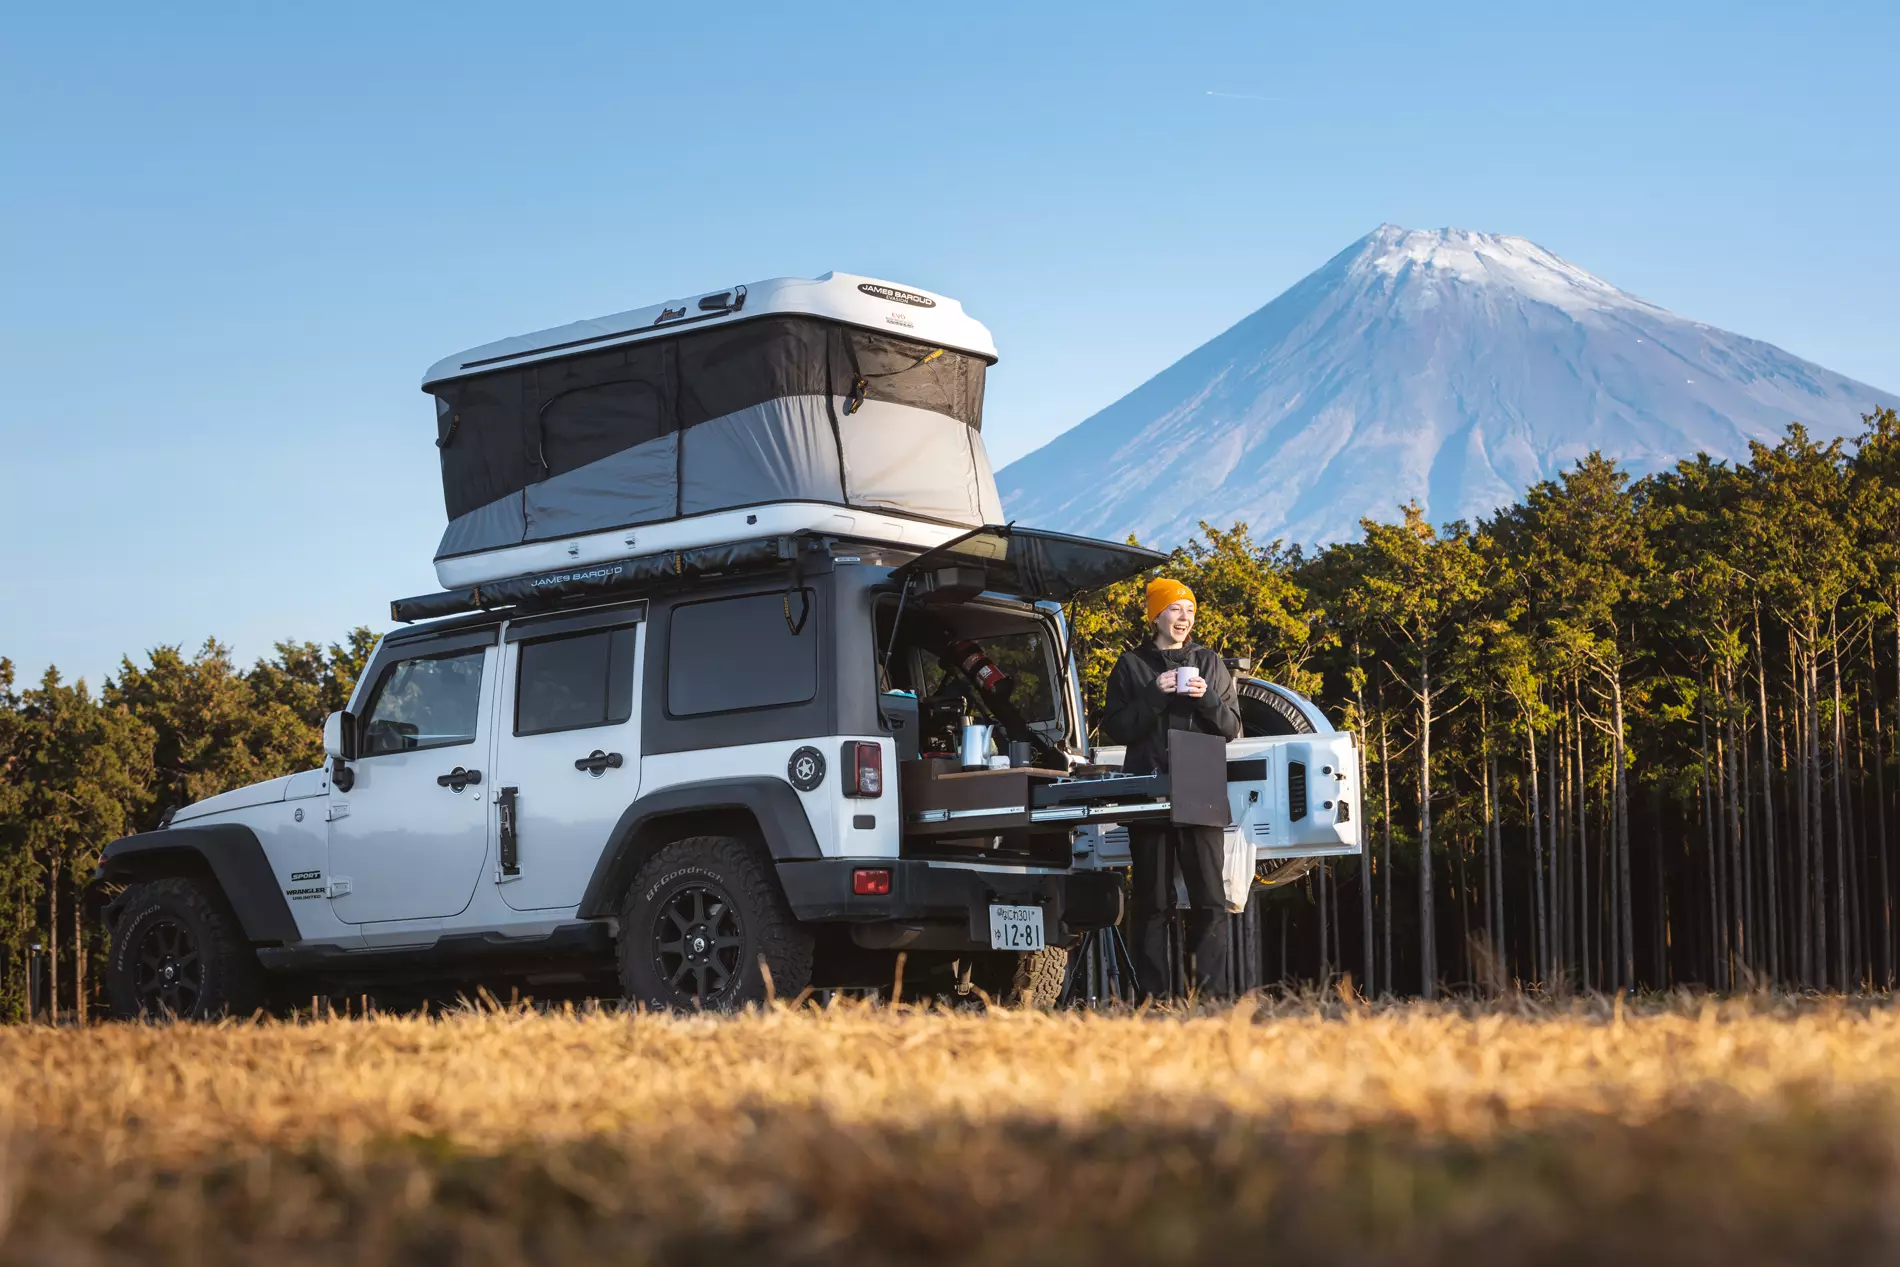 Hannah Price - @currently.hannah camping in front of Mount Fuji Japan